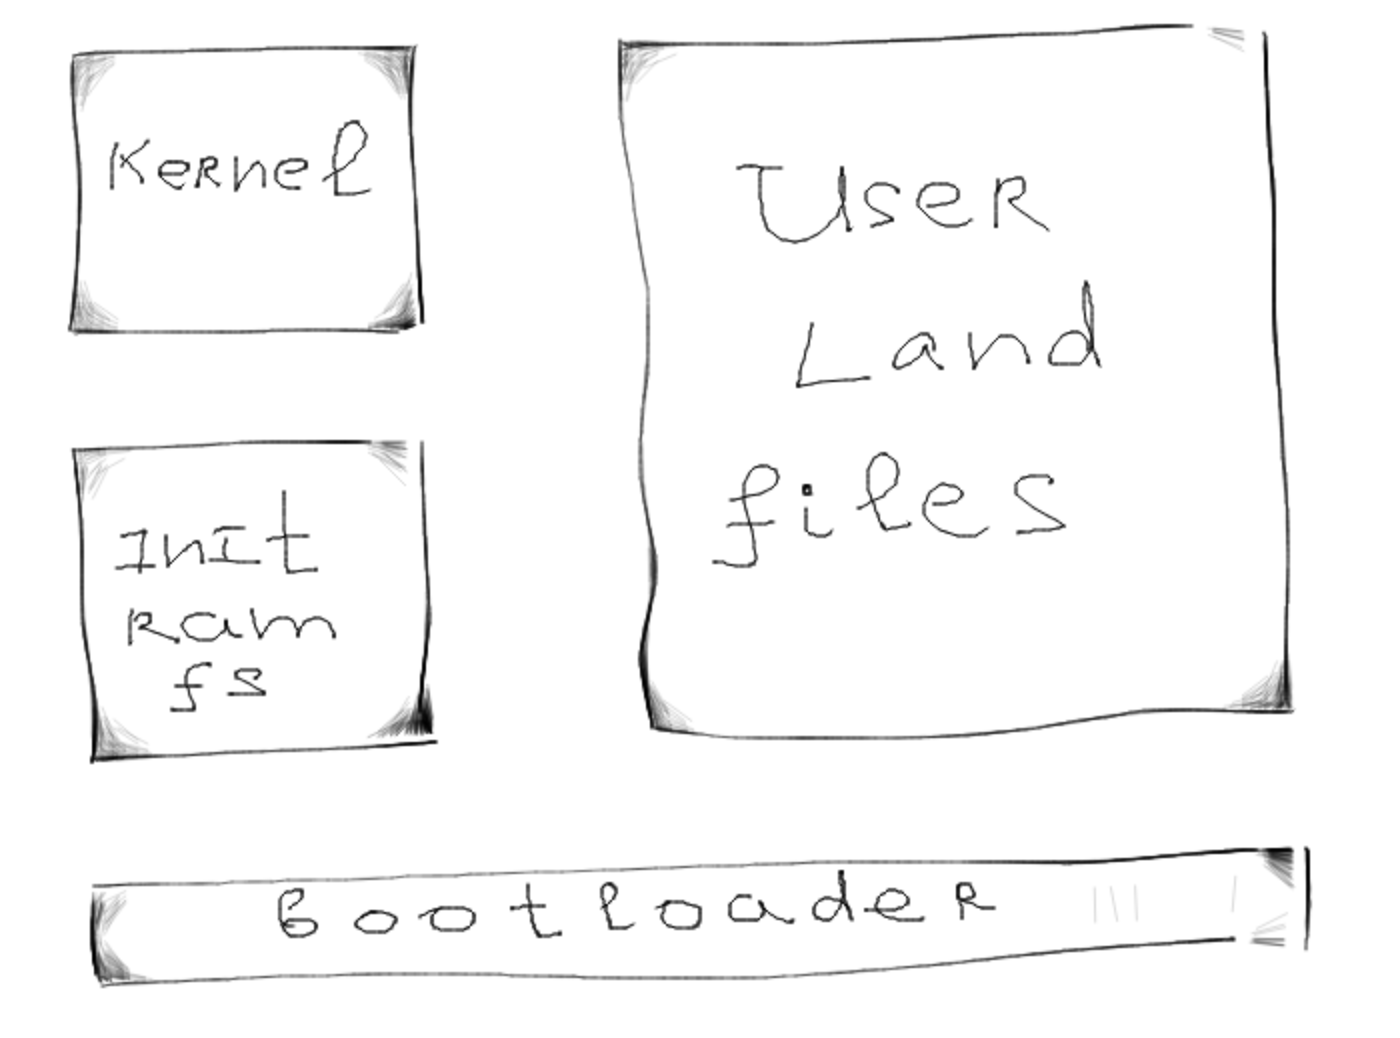 Linux OS architecture - bootloader, initramfs, kernel, and user-land files